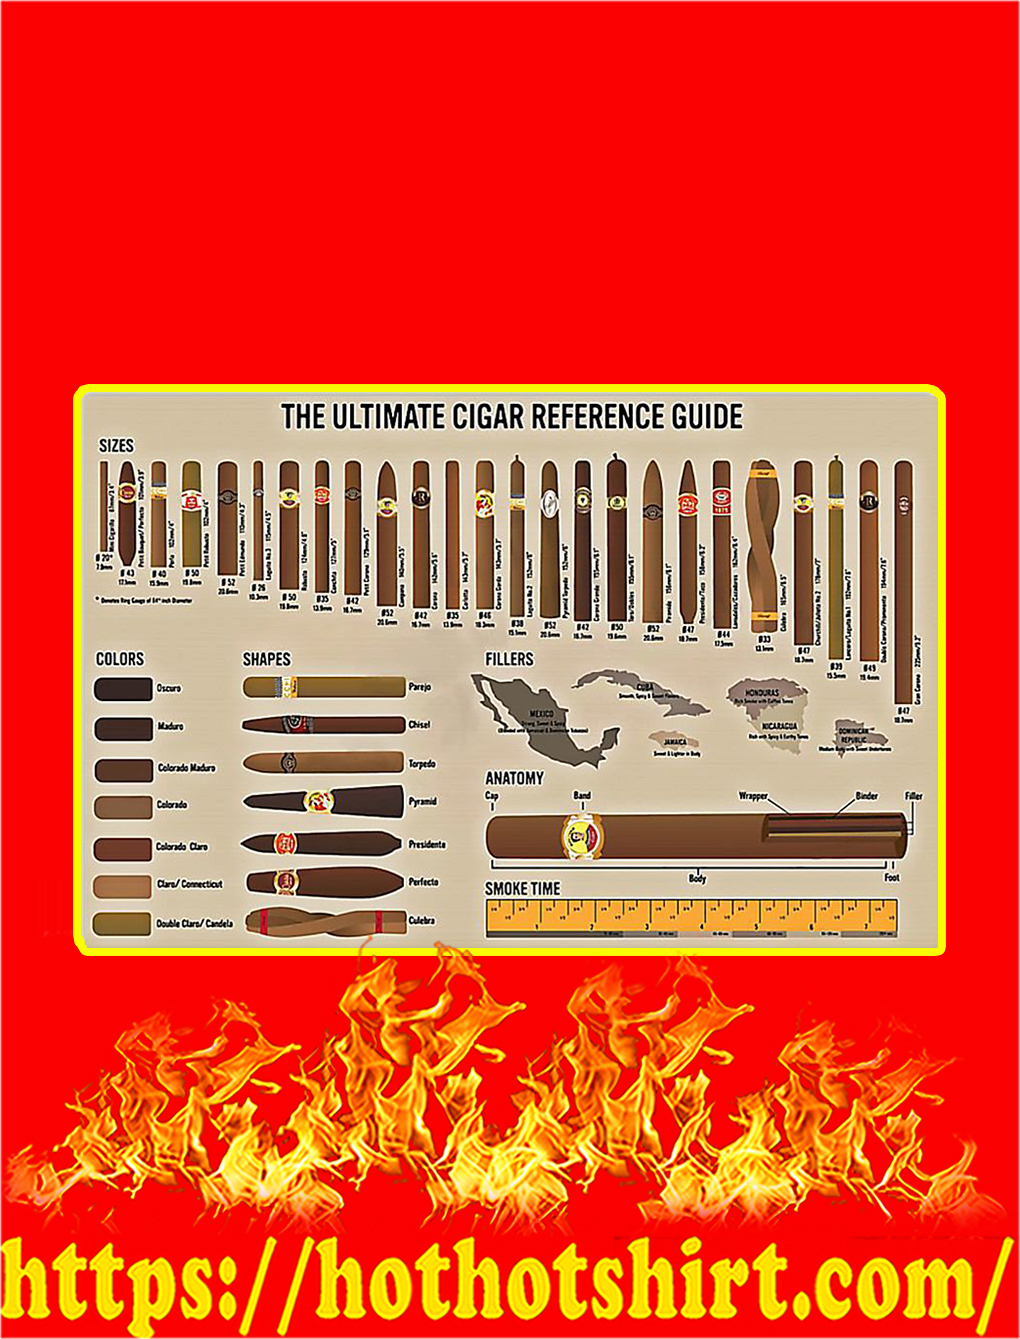 The Ultimate Cigar Reference Guide Poster